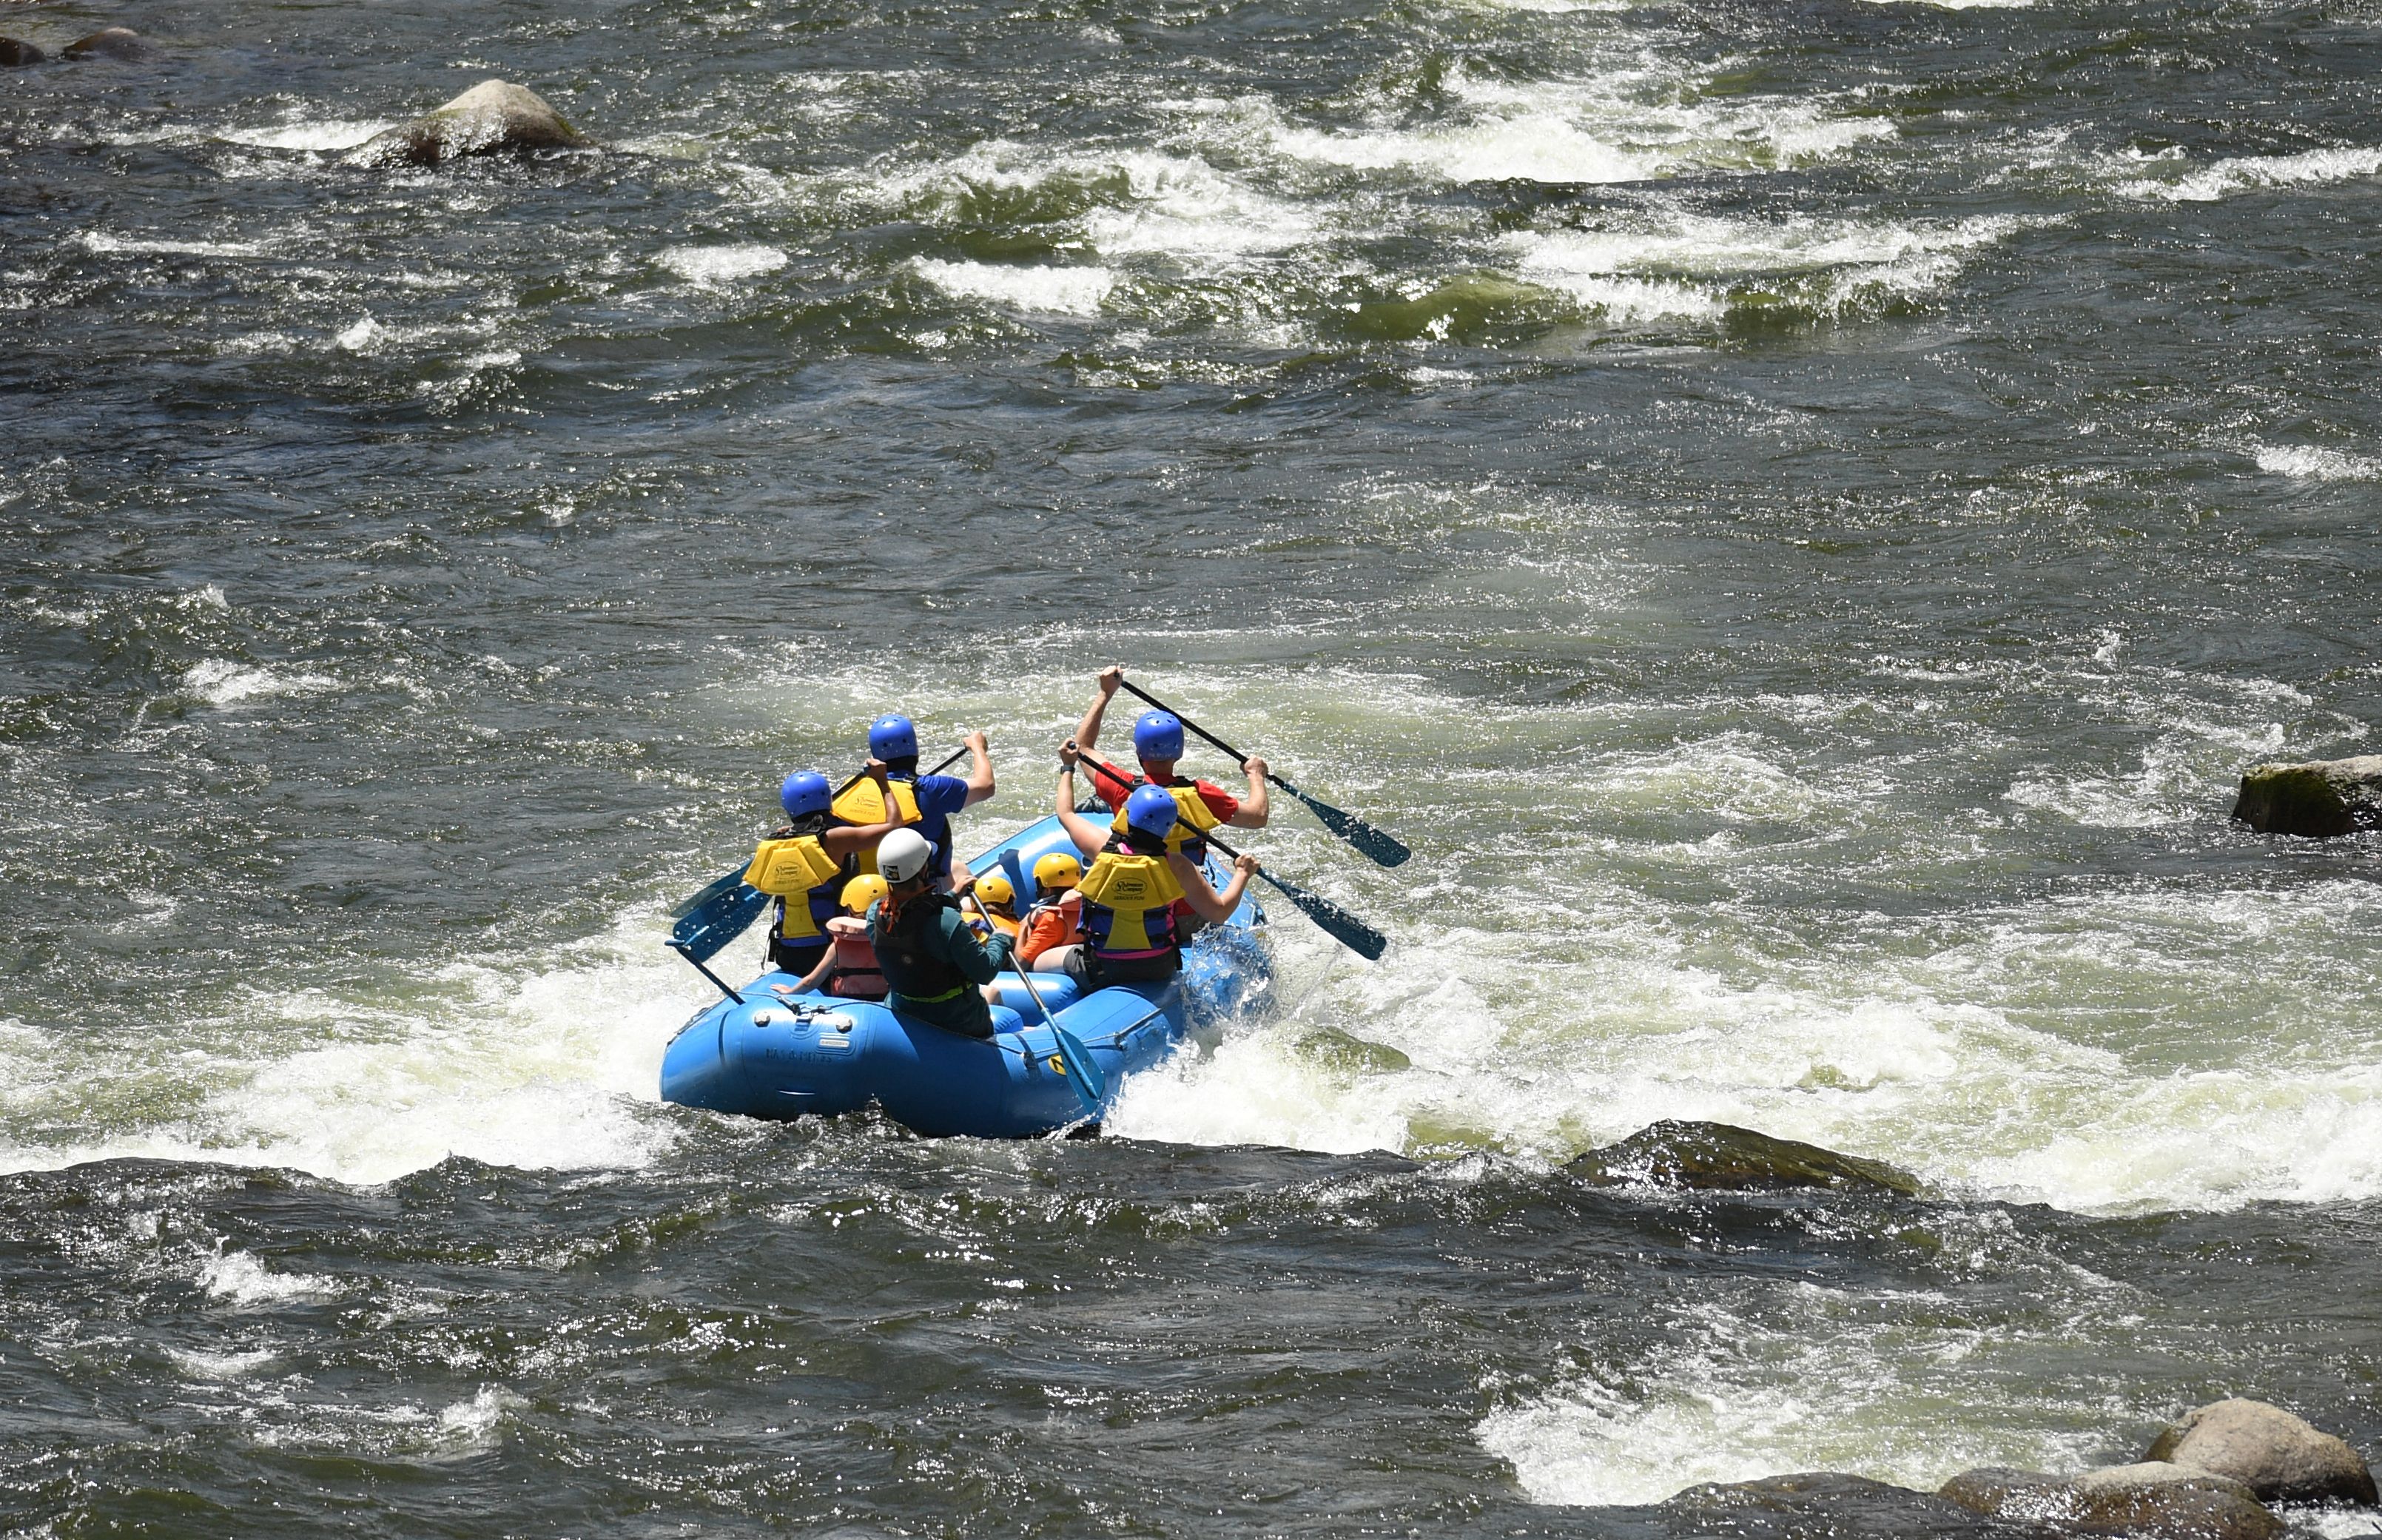 Rafters on a commercial raft trip make their way down the Arkansas River on June 27, 2020 outside of Buena Vista, Colorado.